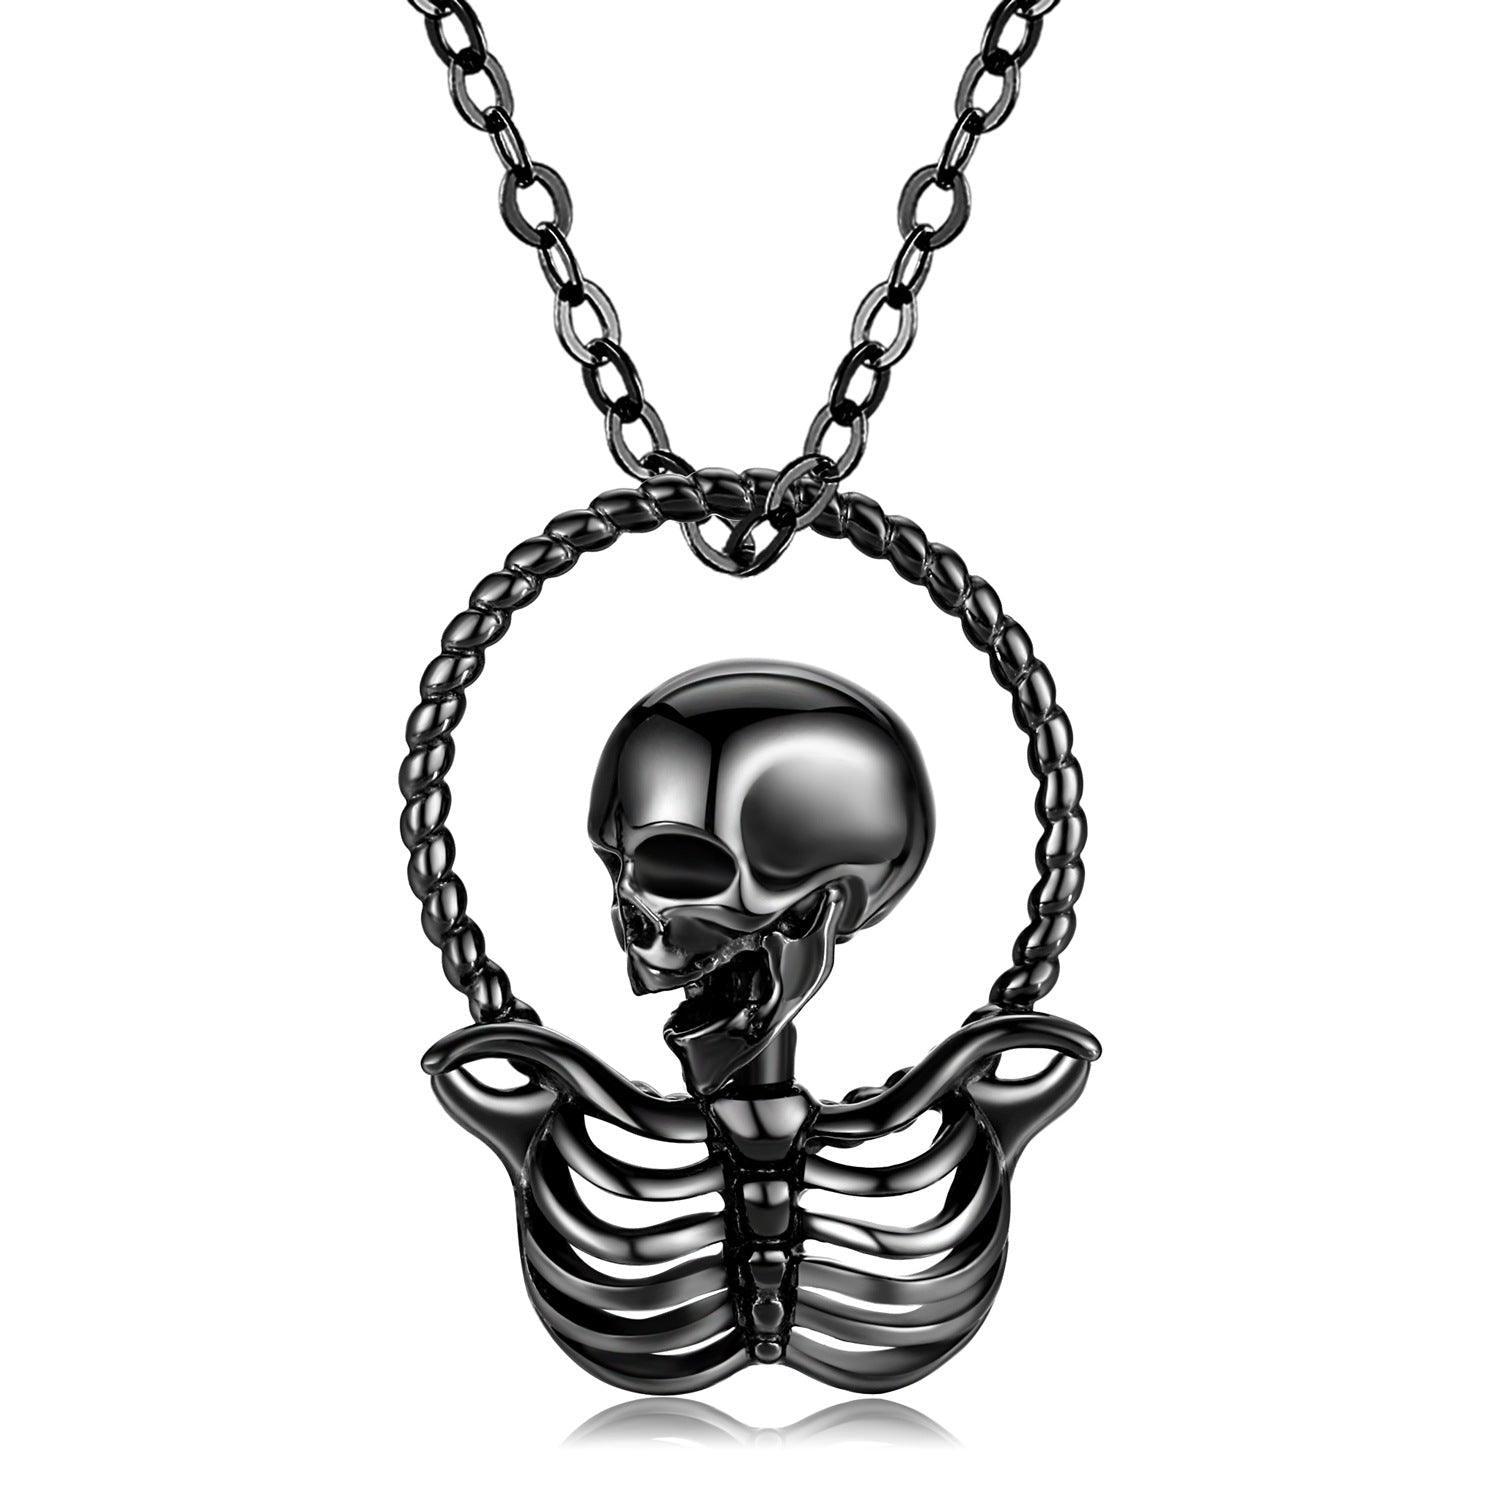 Skull GOD Electroplated Black Gold Necklace in 2023 | Skull GOD Electroplated Black Gold Necklace - undefined | Black Gold Necklace, creative necklace, S925 Sterling Silver Necklace, Skull GOD Electroplated Necklace | From Hunny Life | hunnylife.com